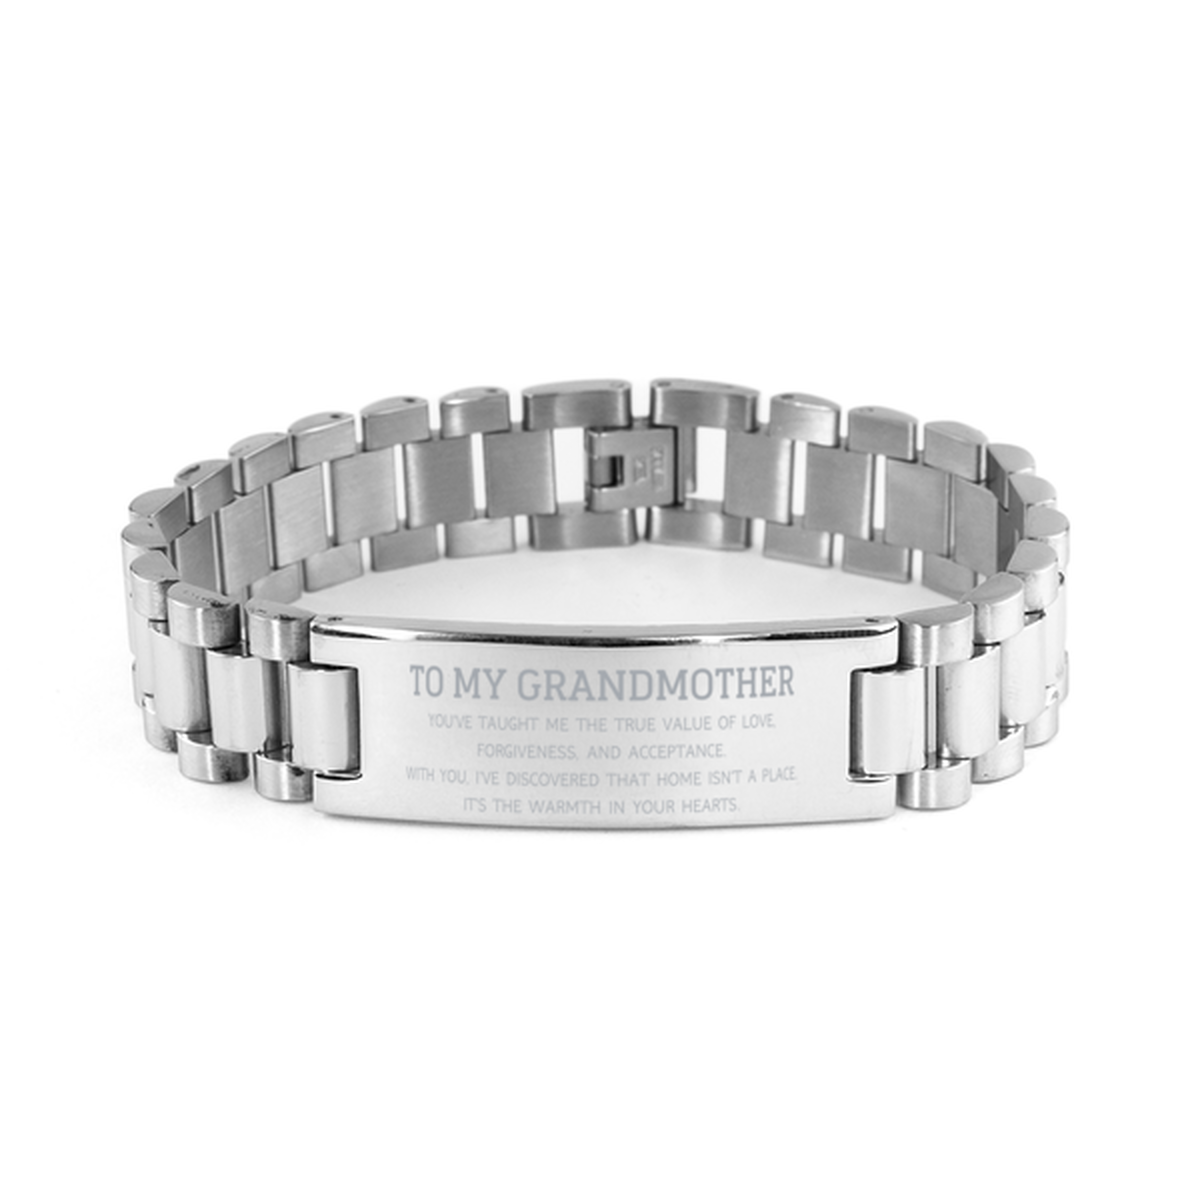 To My Grandmother Gifts, You've taught me the true value of love, Thank You Gifts For Grandmother, Birthday Ladder Stainless Steel Bracelet For Grandmother